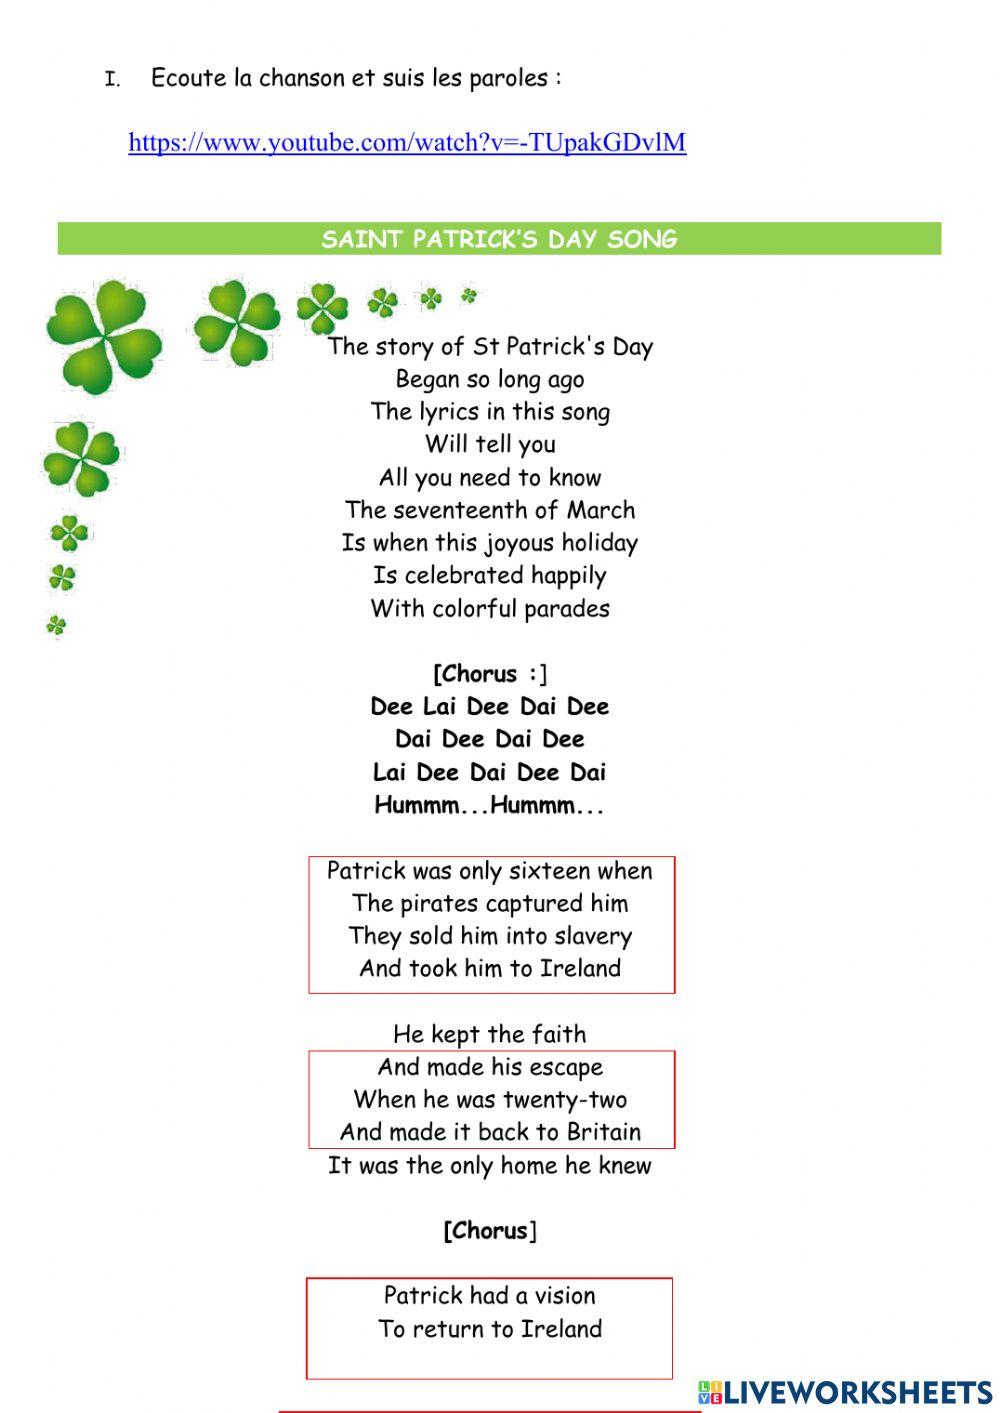 CE Saint Patrick's Day song